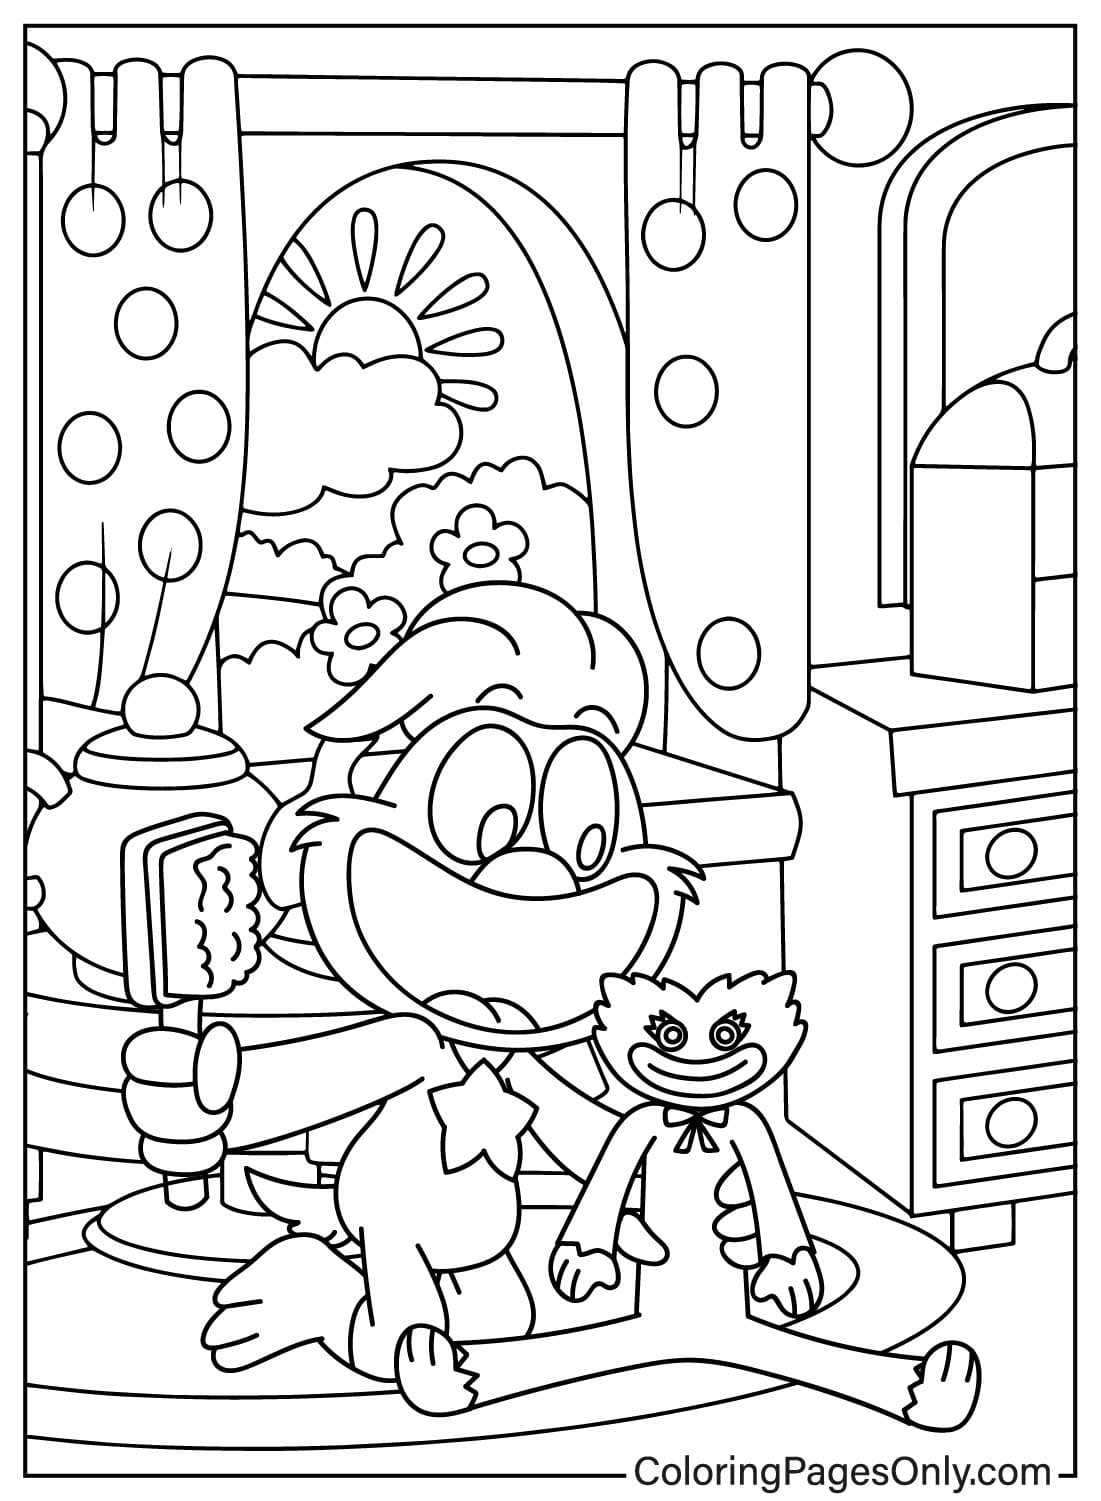 KickinChicken and Kissy Missy Coloring Sheet from KickinChicken